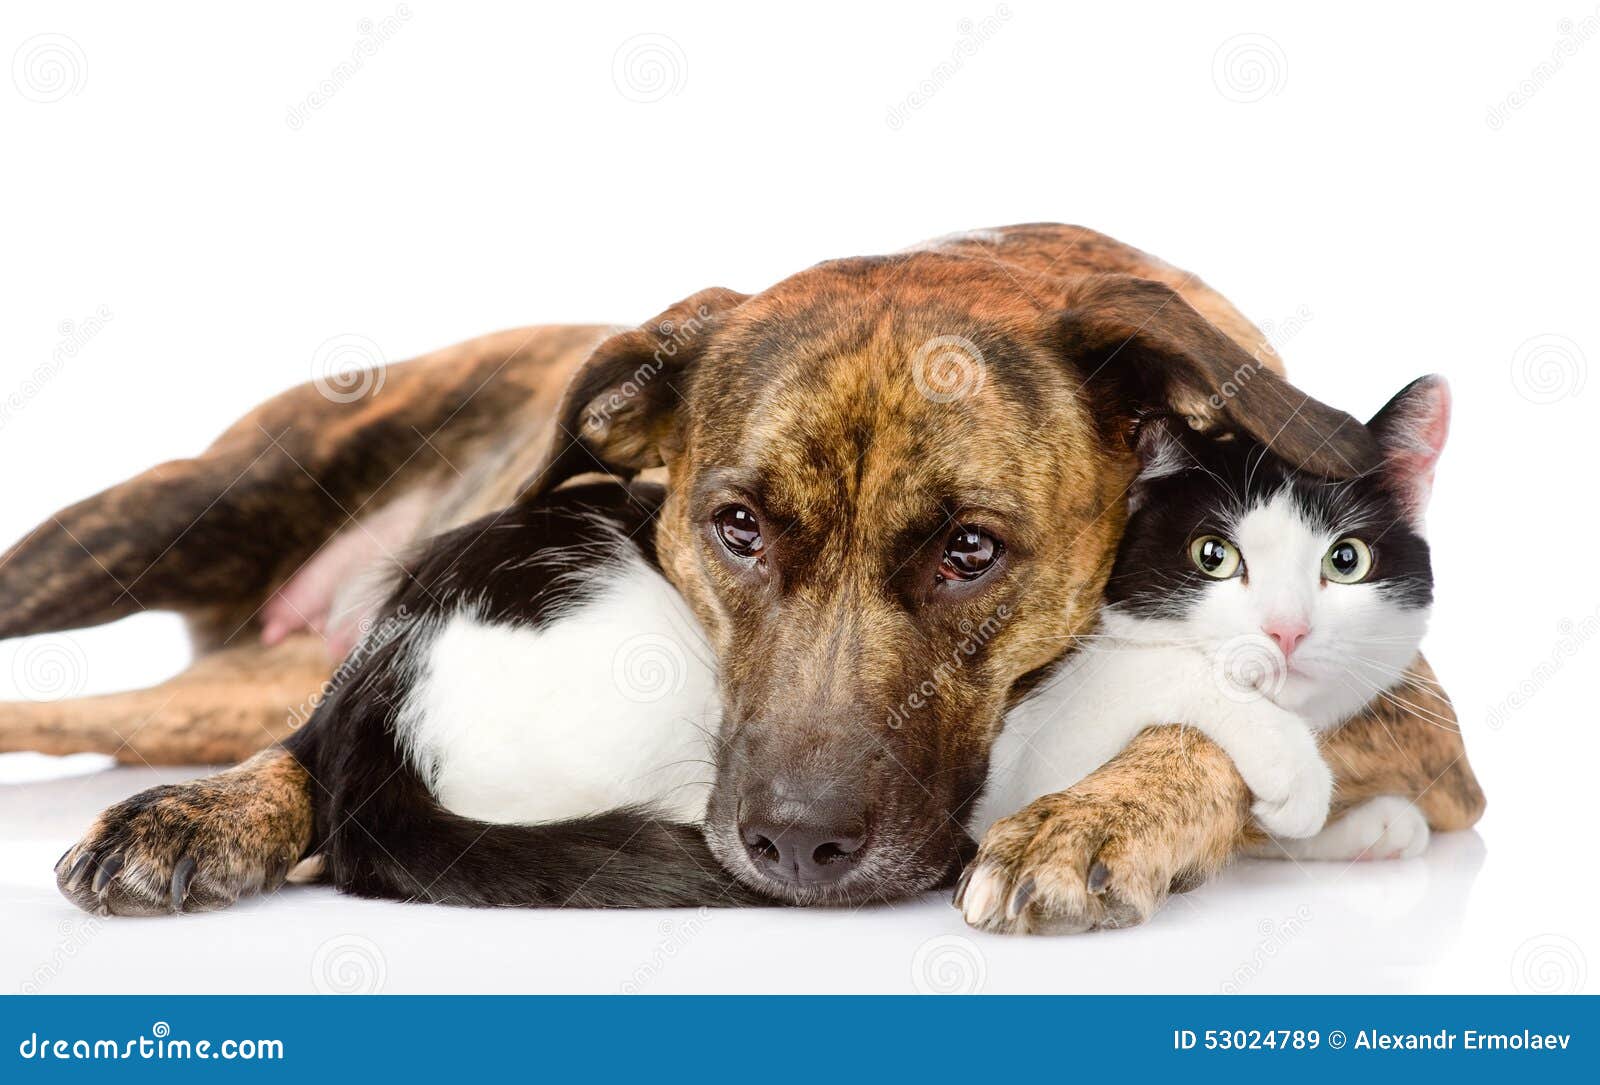 Mixed Breed Dog and Cat on White Stock Image - Image of backgr, 53024789